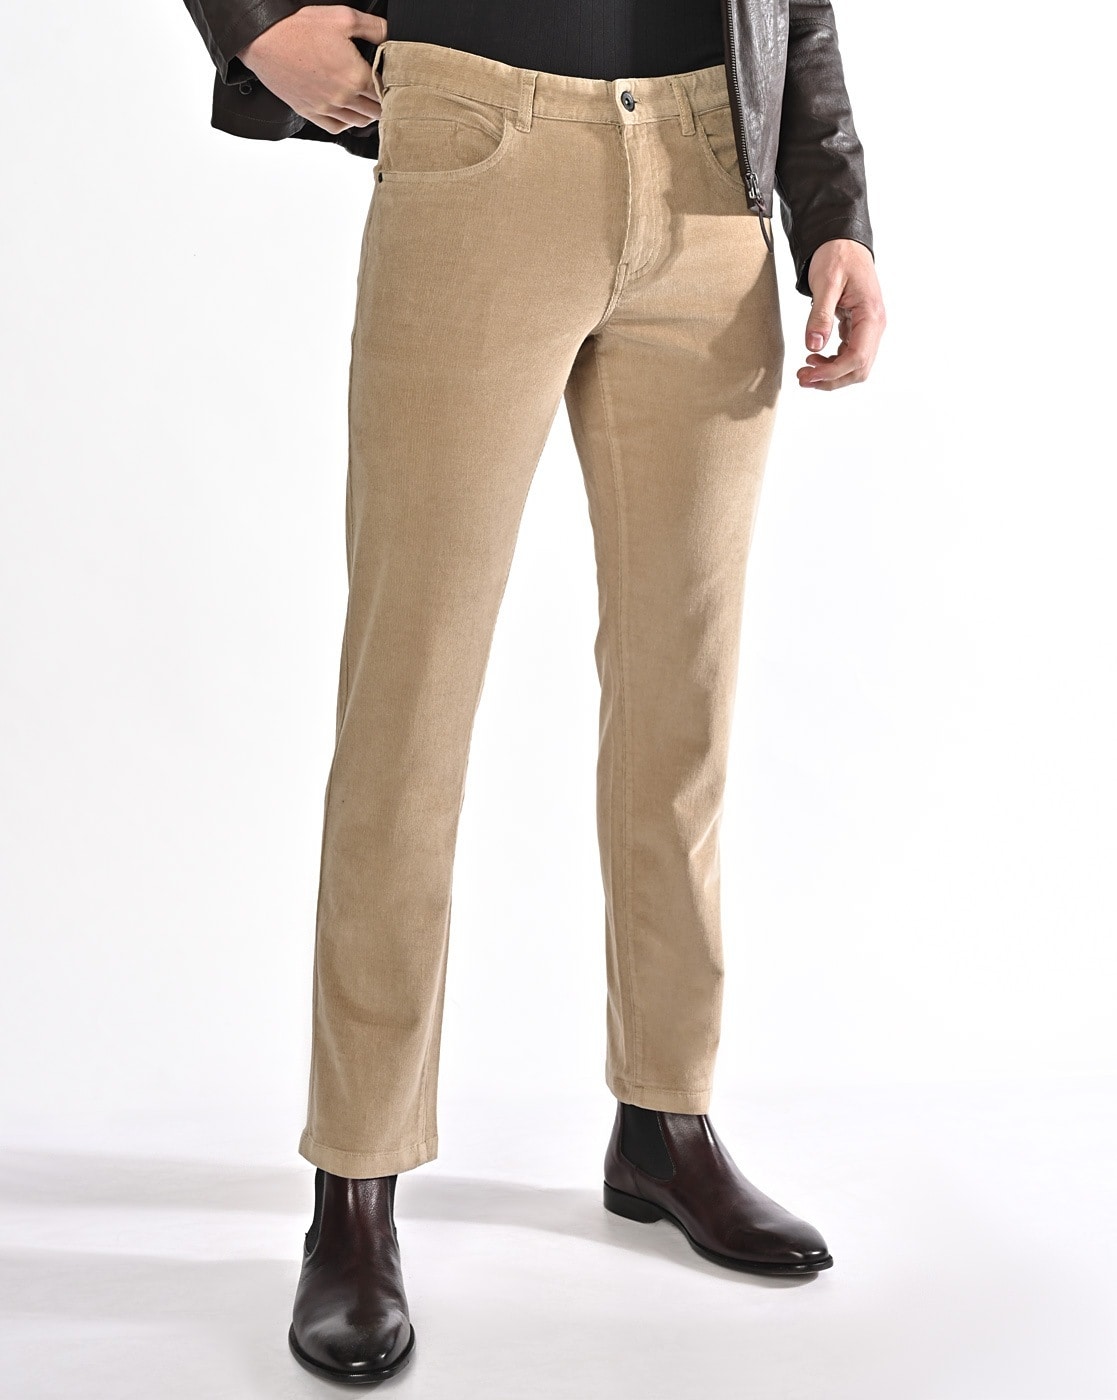 Buy Slim Fit Trousers Online at Best Prices in India - JioMart.